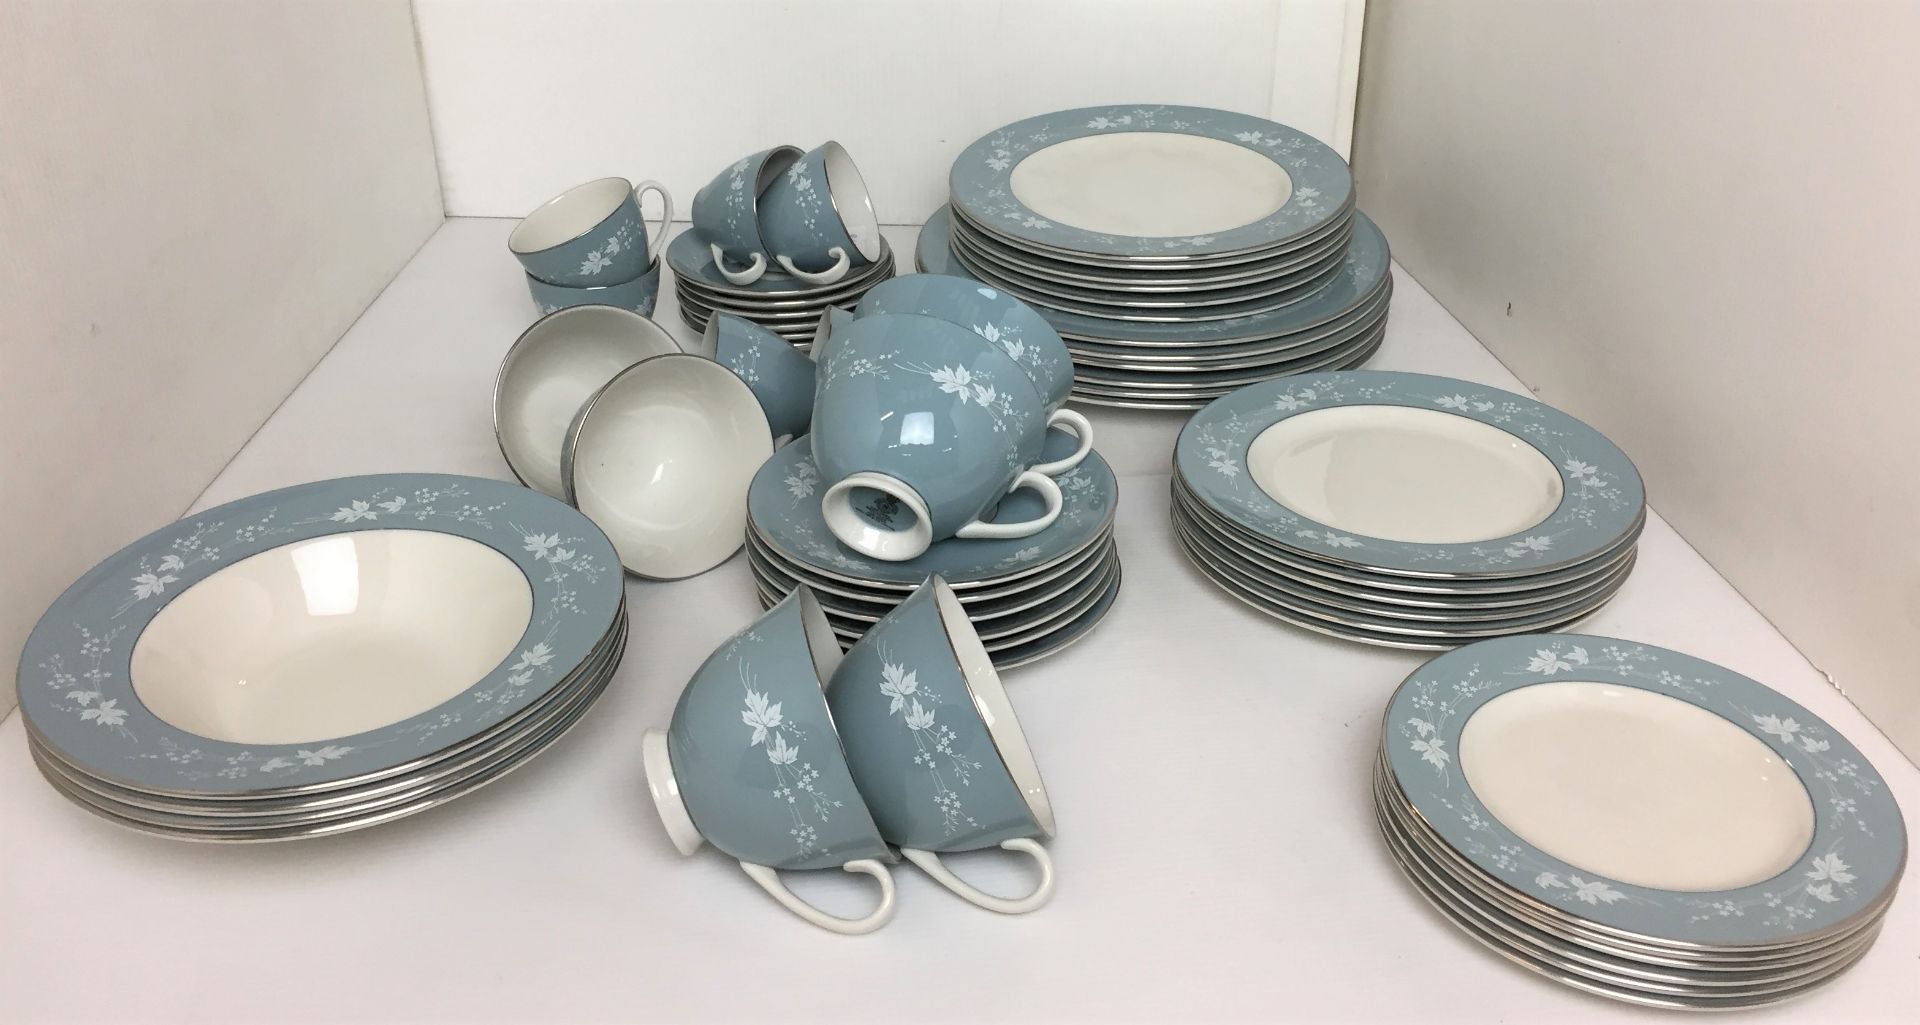 Fifty two pieces Royal Doulton Reflection china dinner/tea service including six each of plates